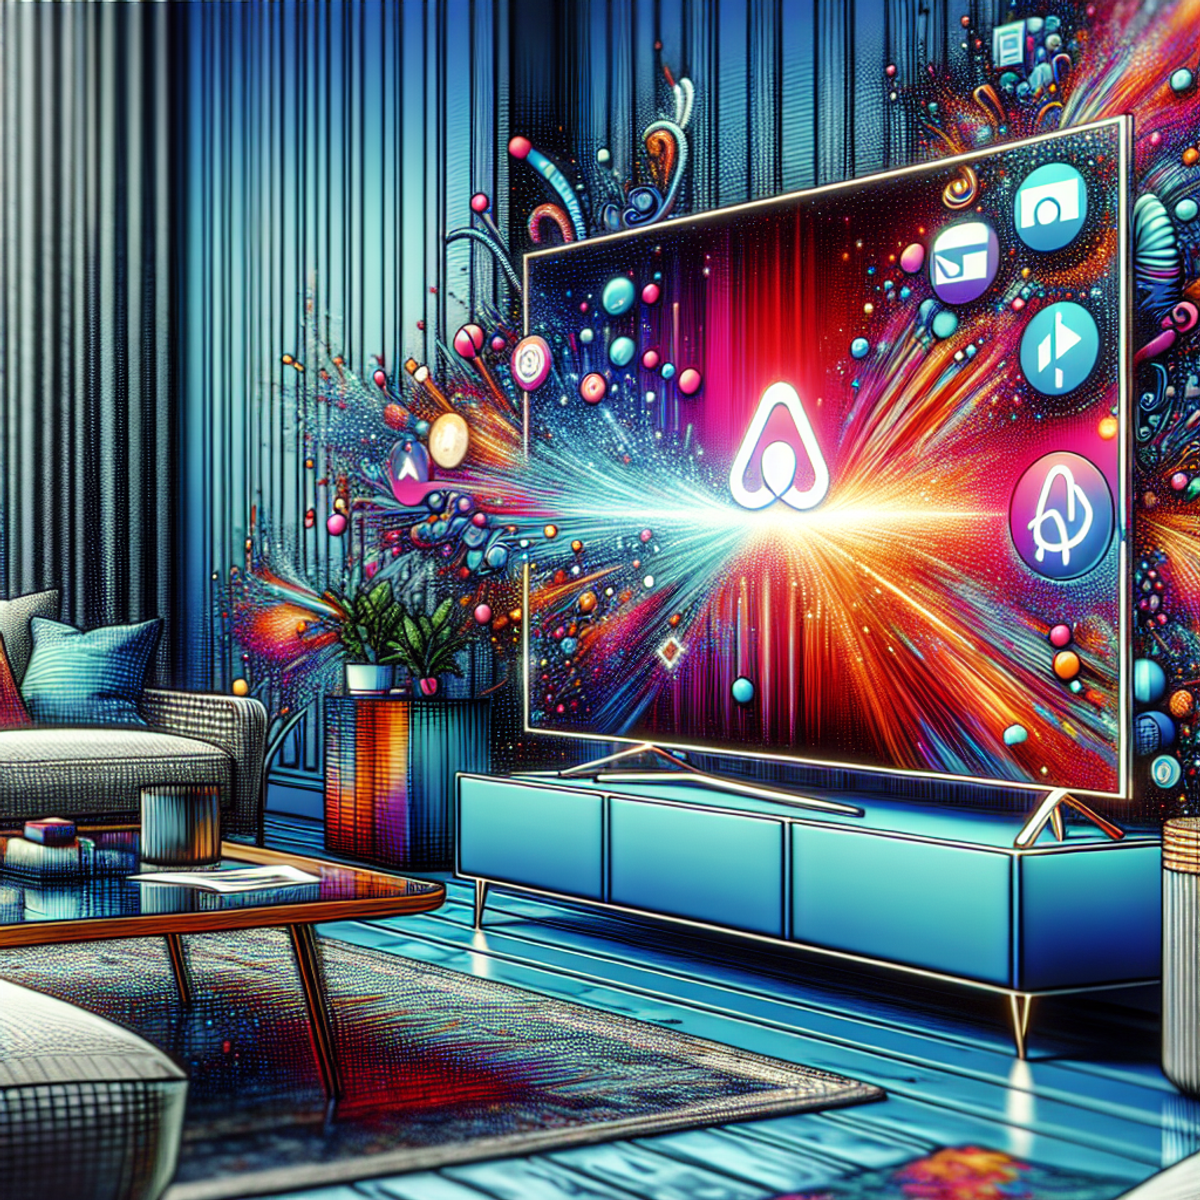 best smart tvs for airbnb 